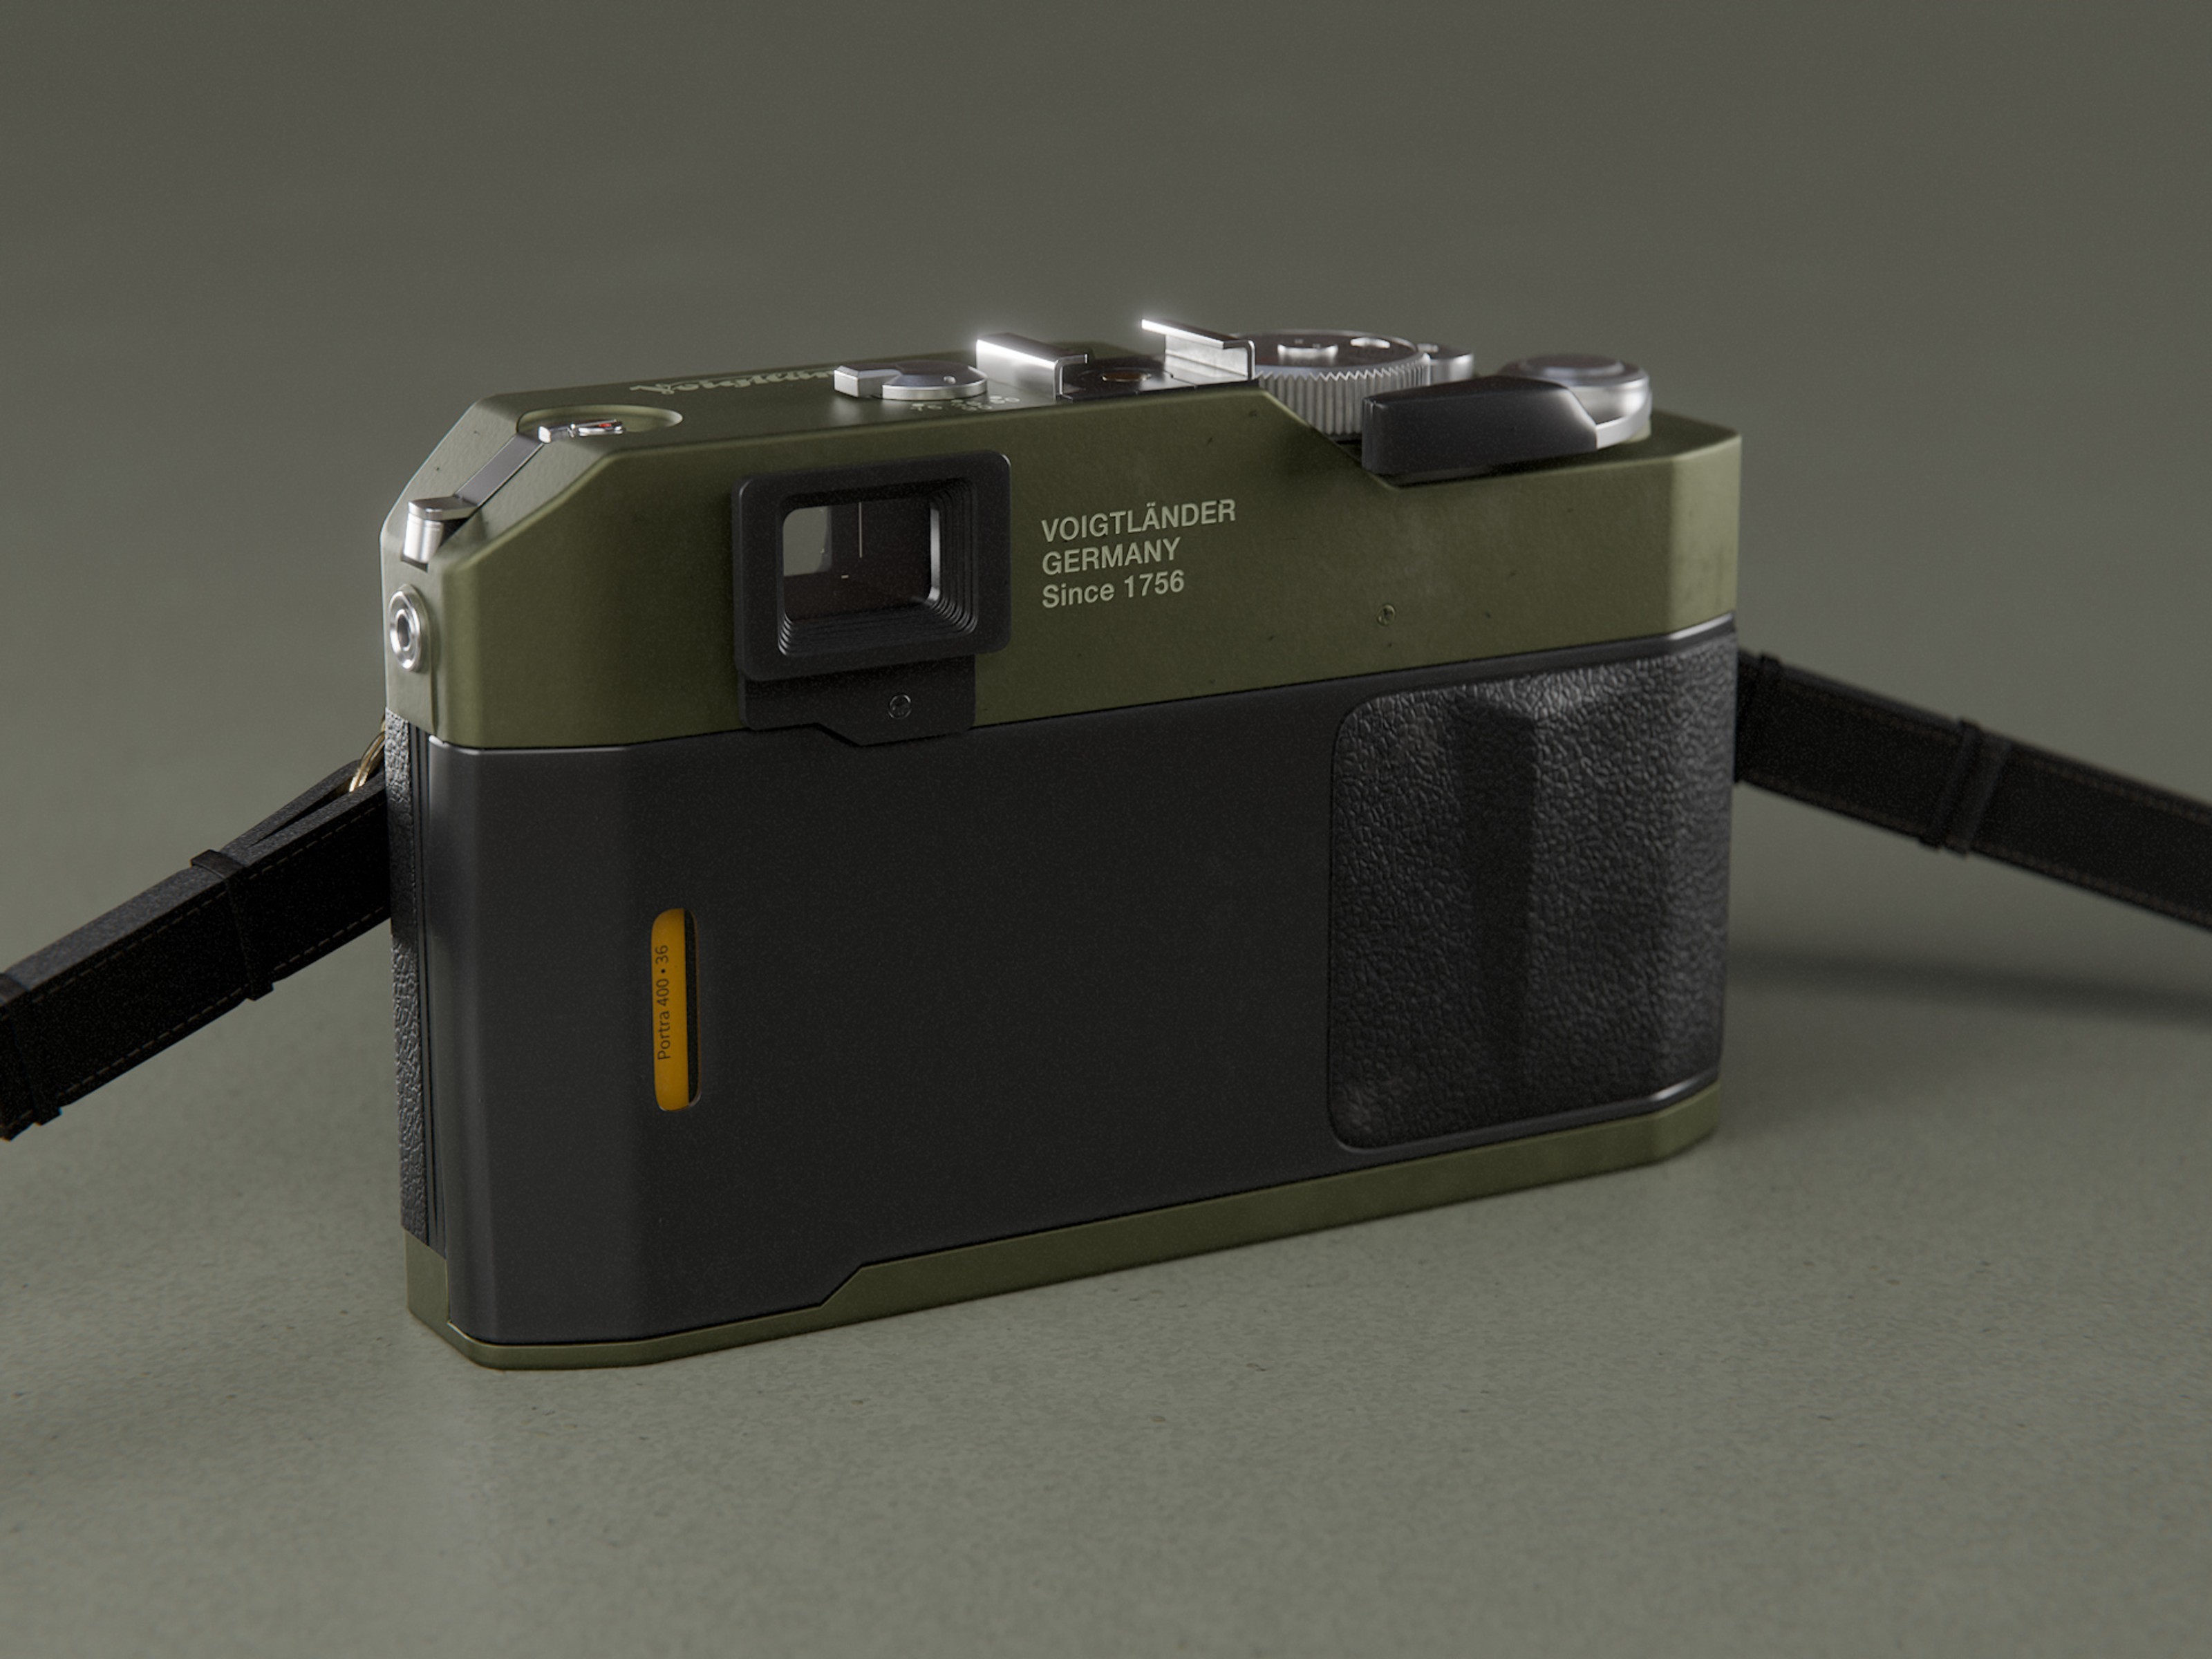 Render of the back of the camera.